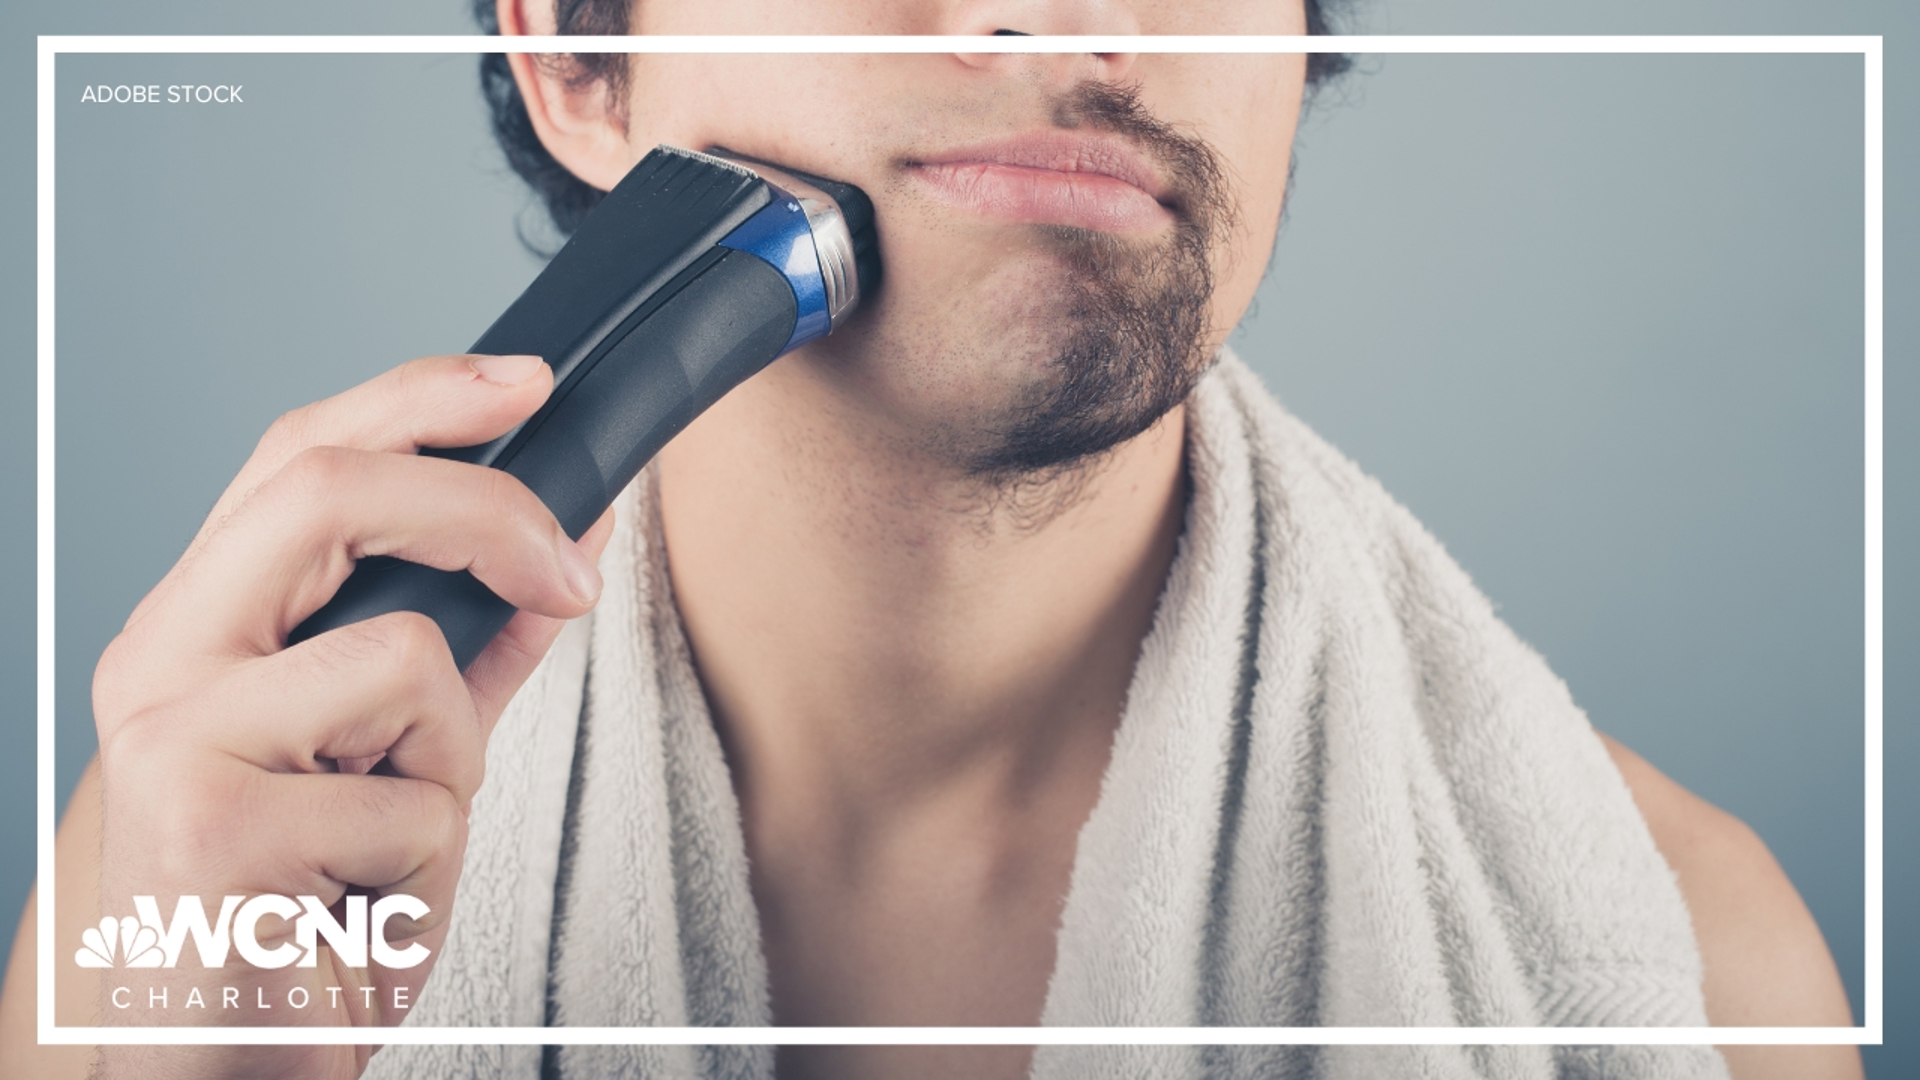 This morning, we want to know: Do you think facial hair is more attractive or do you prefer a clean shave?